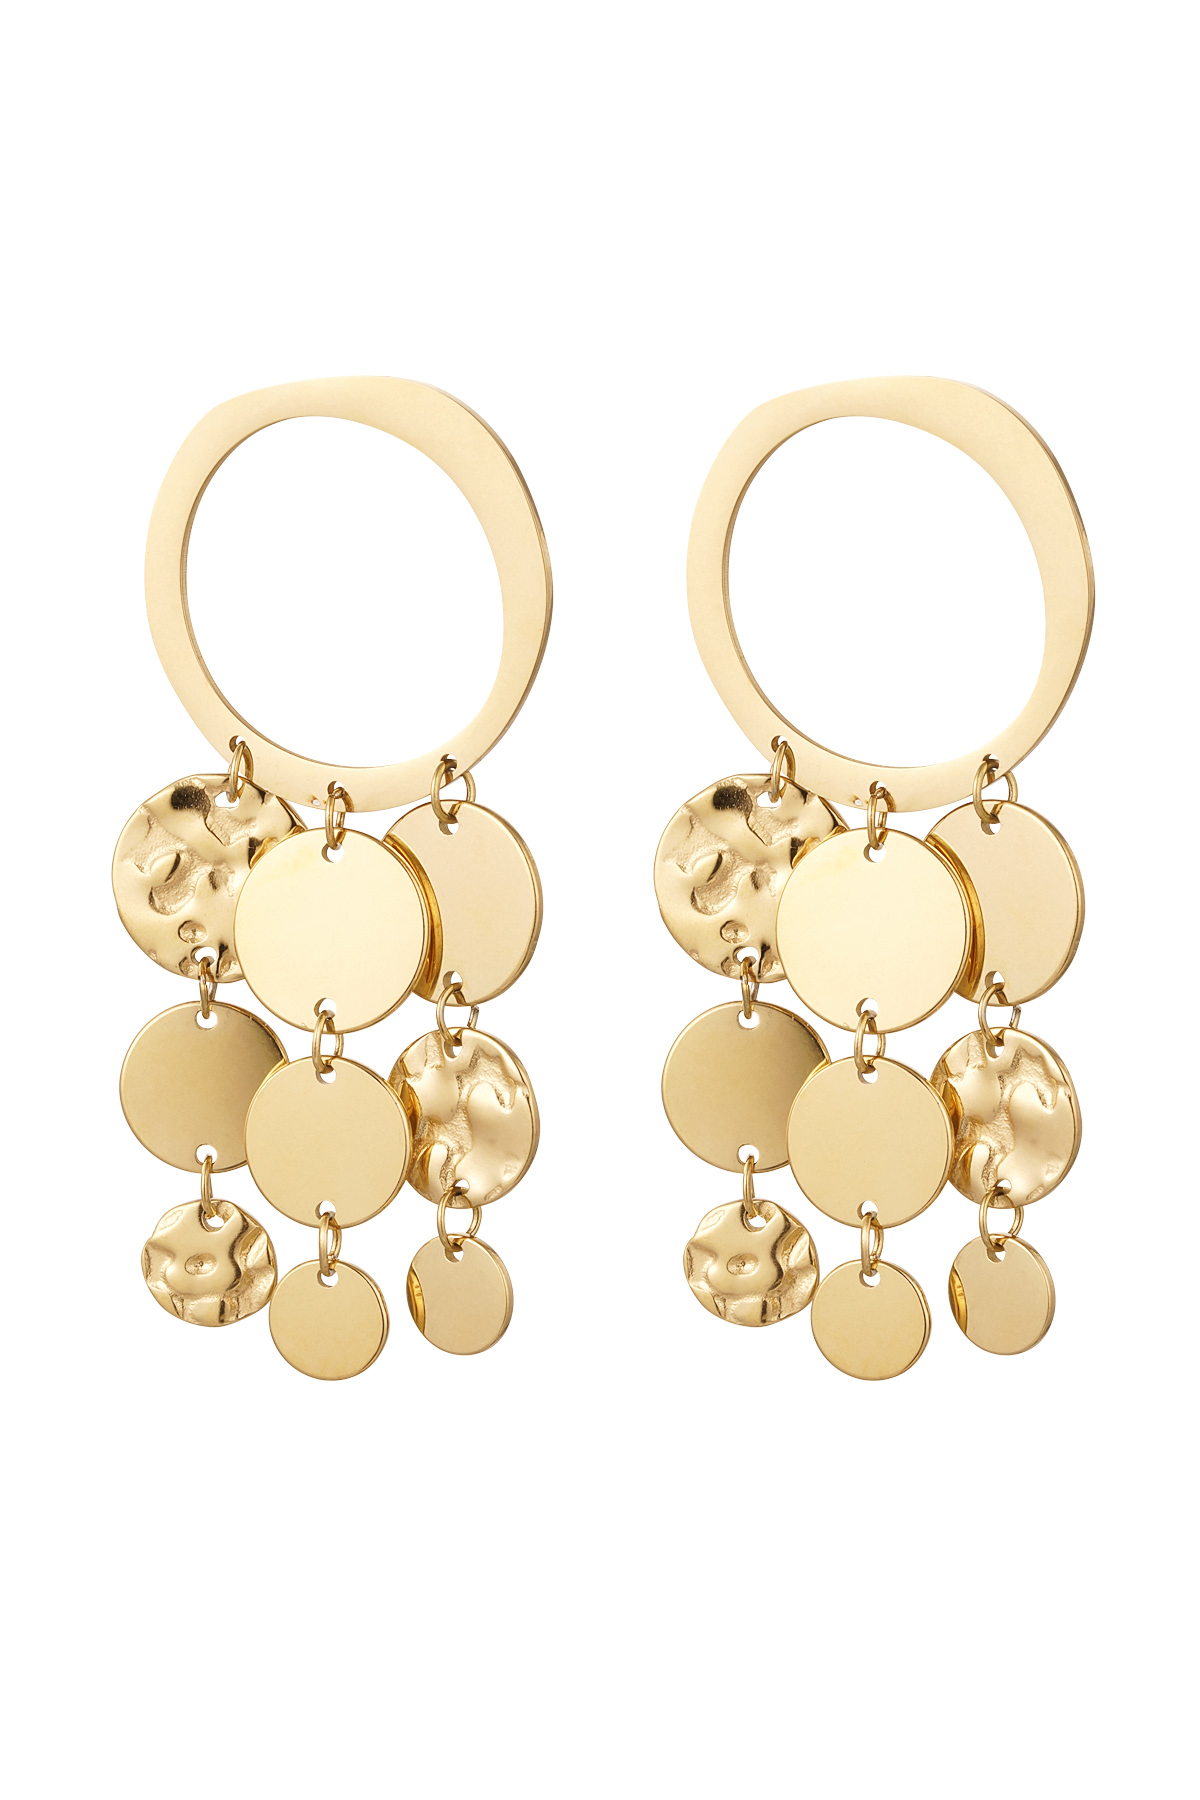 Earrings cheerful garlands - gold Stainless Steel h5 